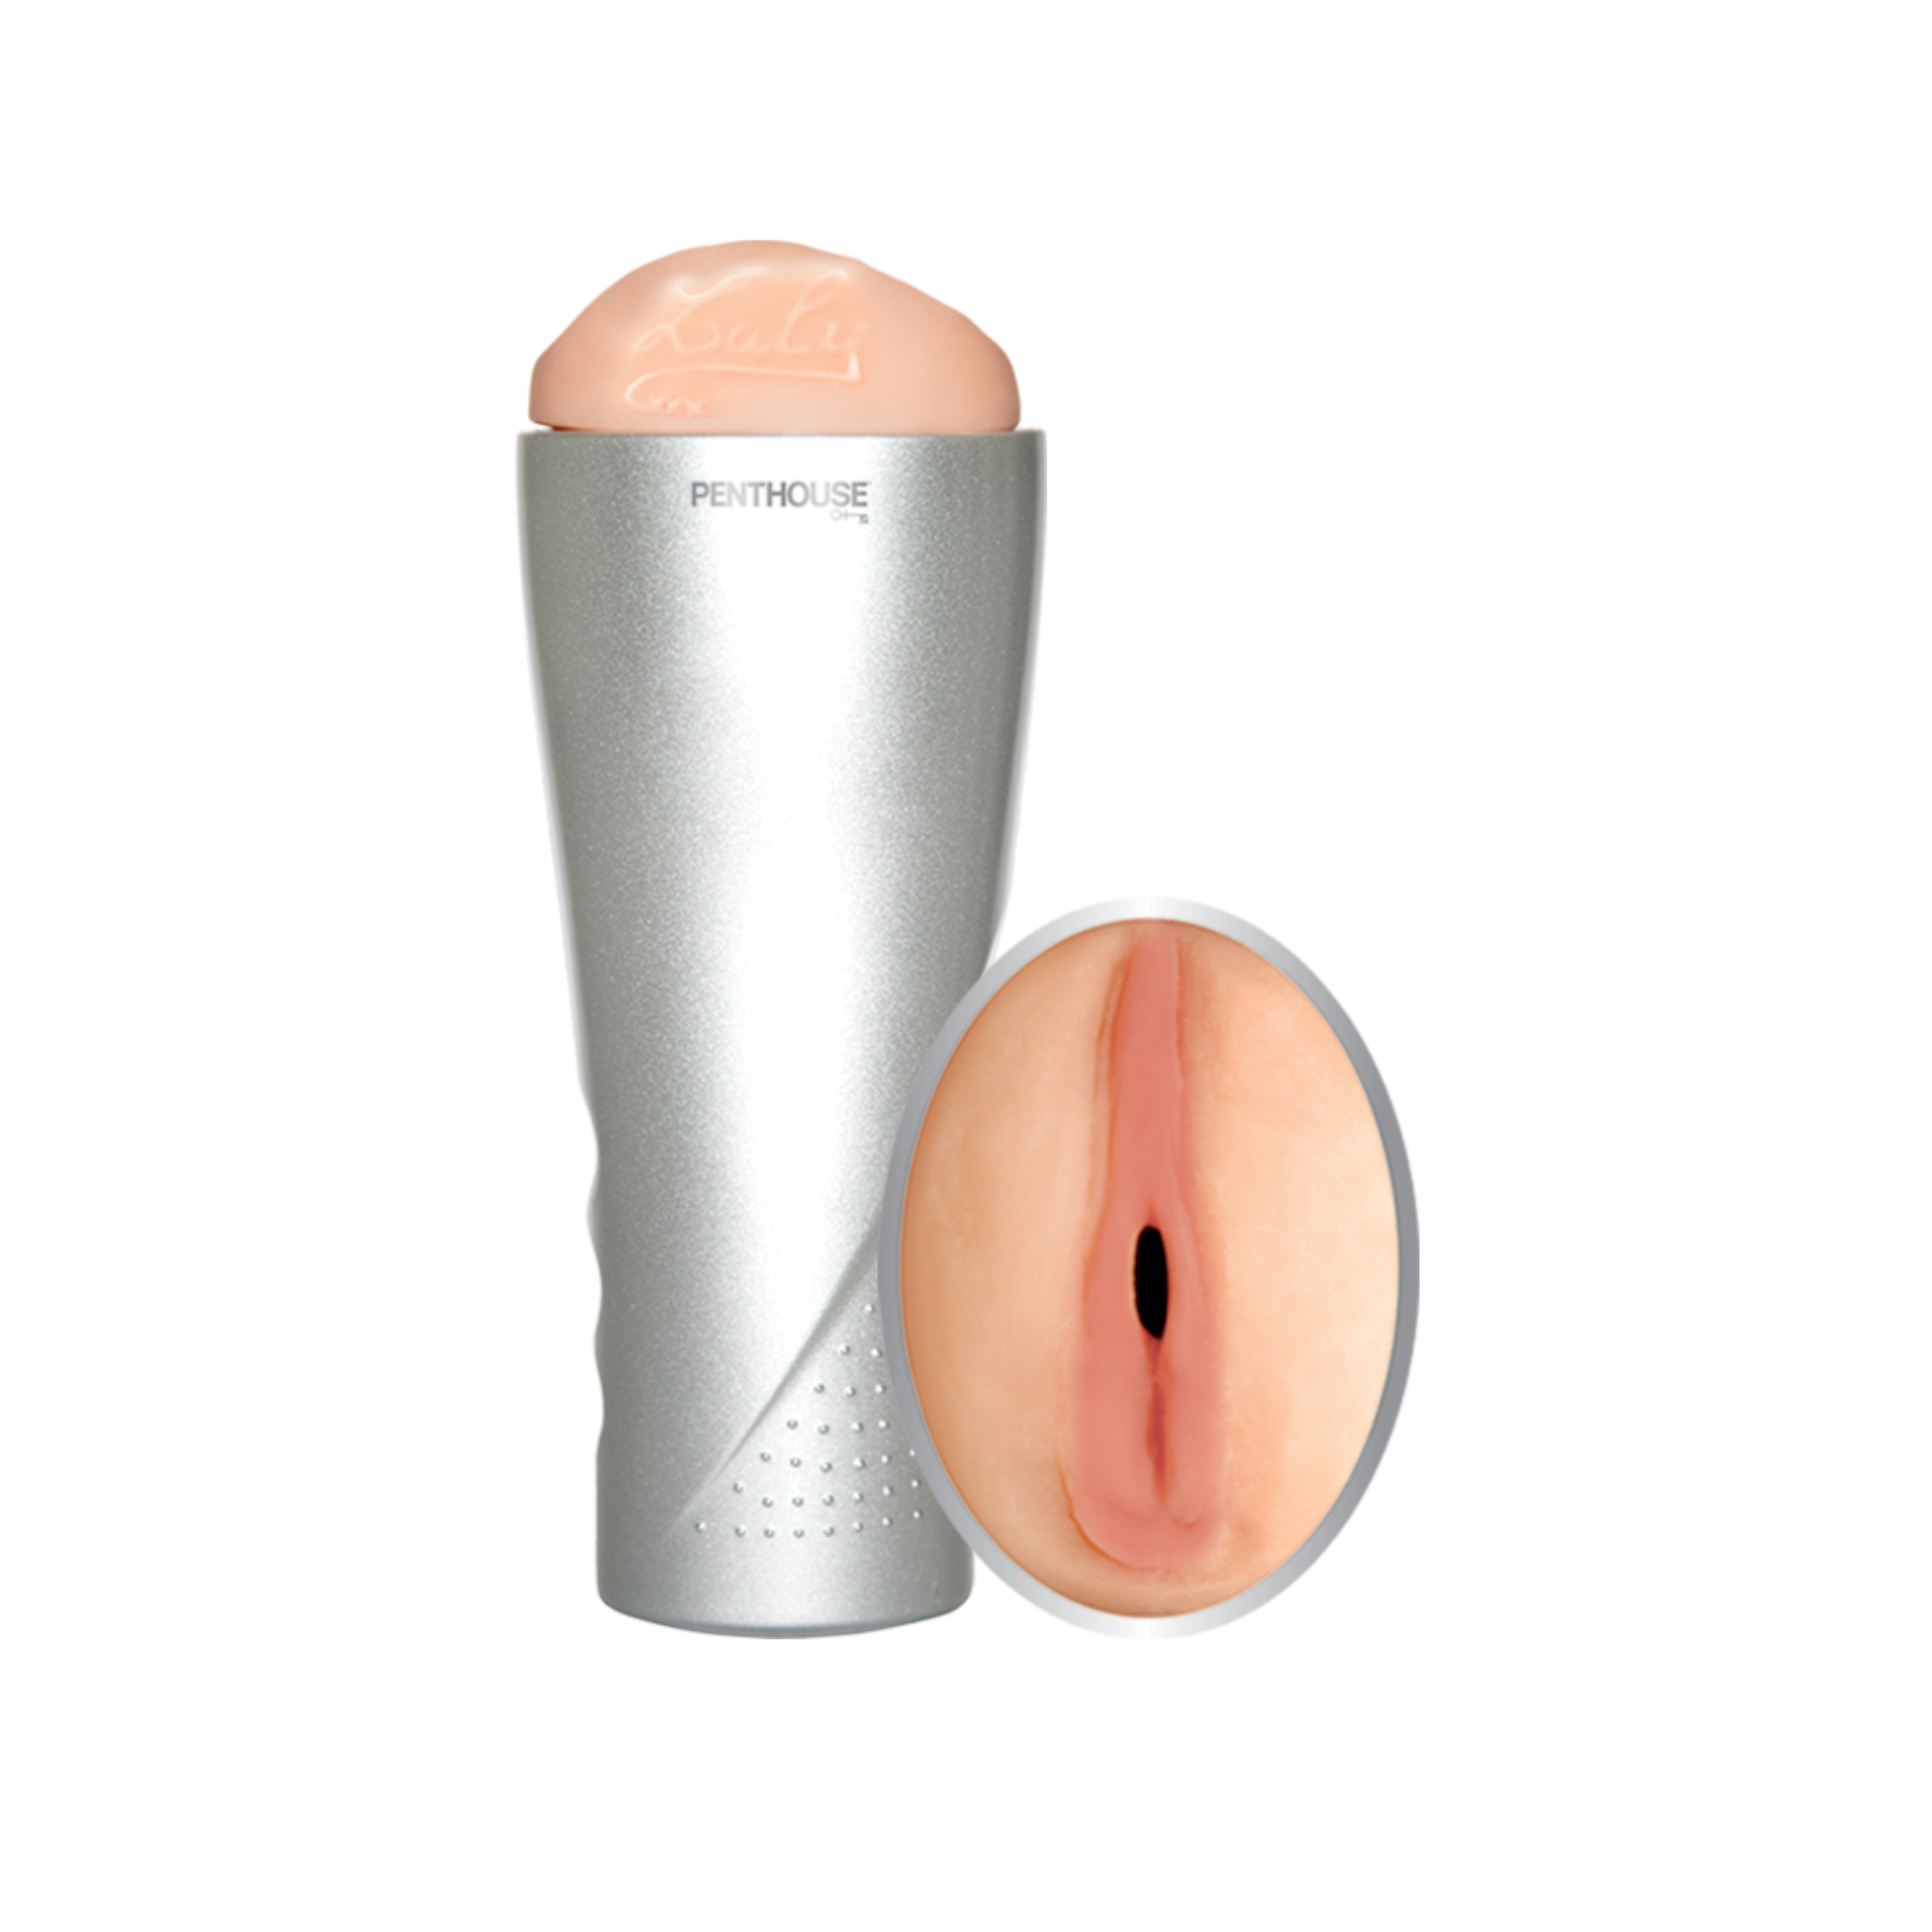 Penthouse Deluxe Cyberskin Vibrating Stroker -  Laly